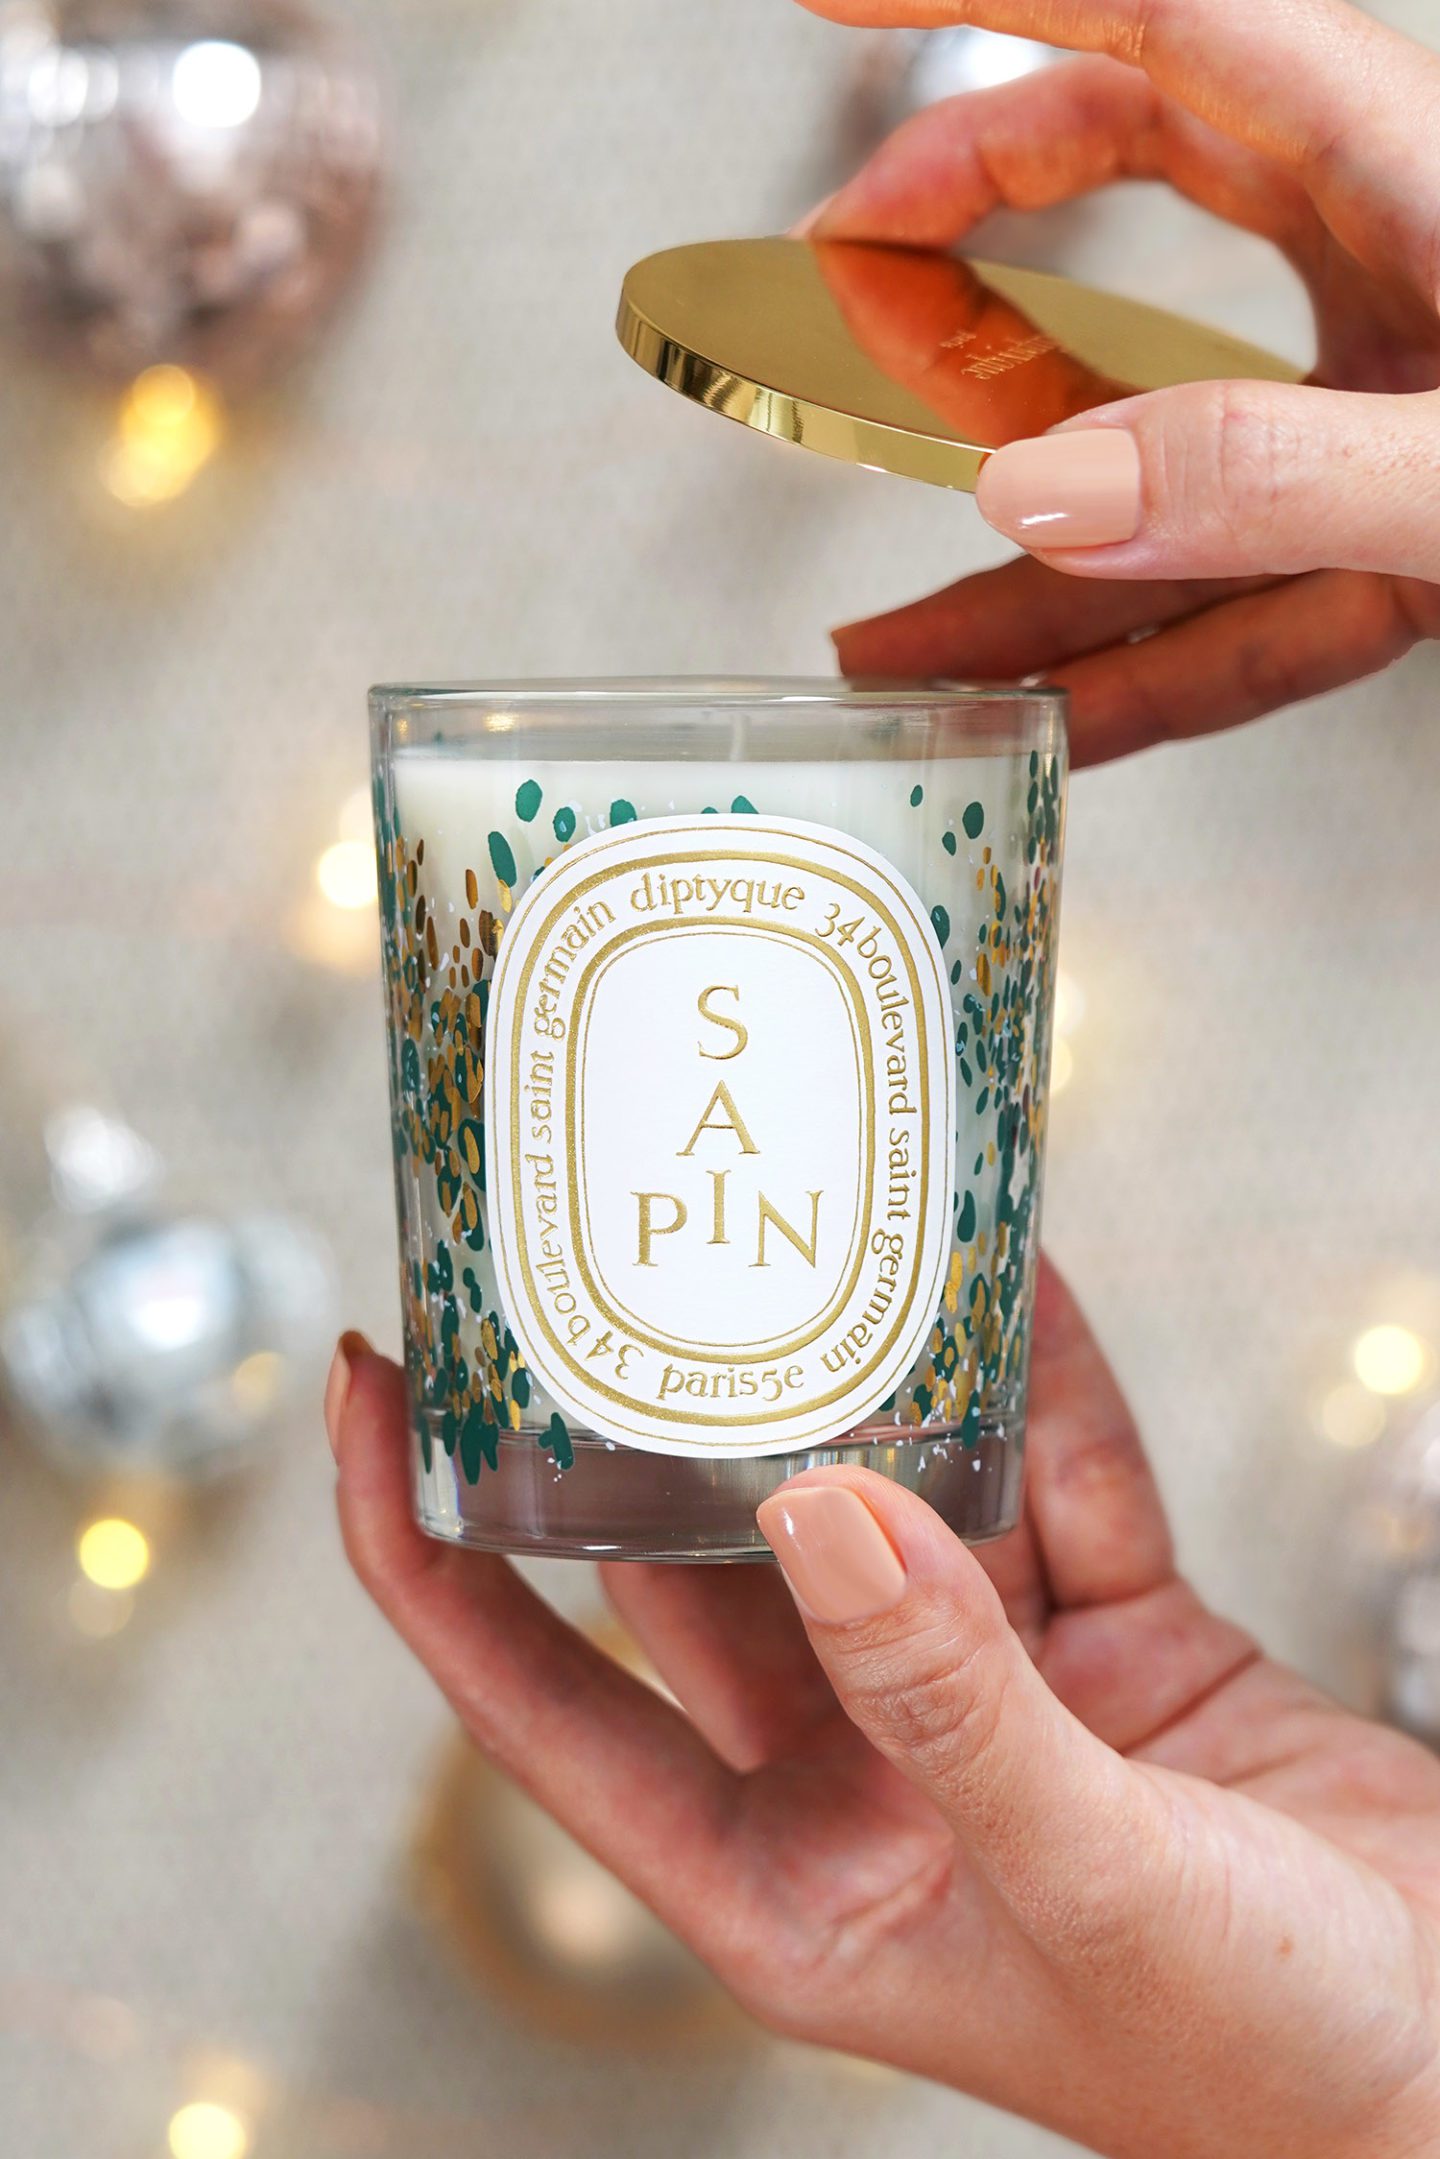 Diptyque Sapin Candle Holiday 2021